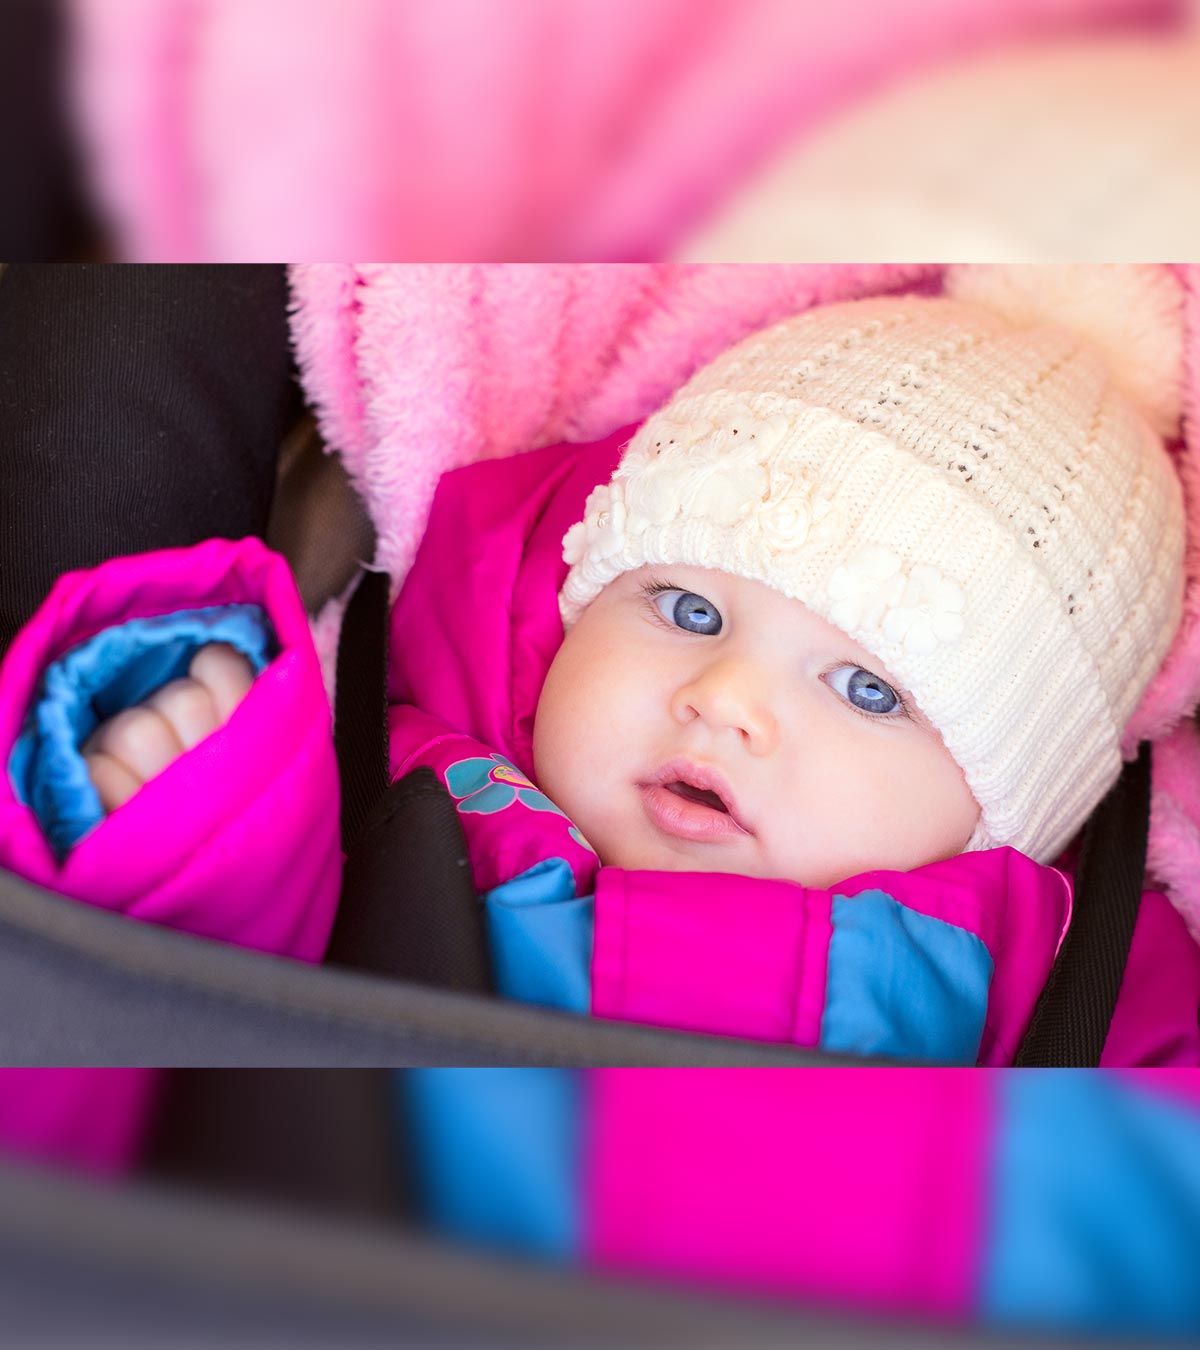 Babies Born With Blue Eyes – Does The Color Change?